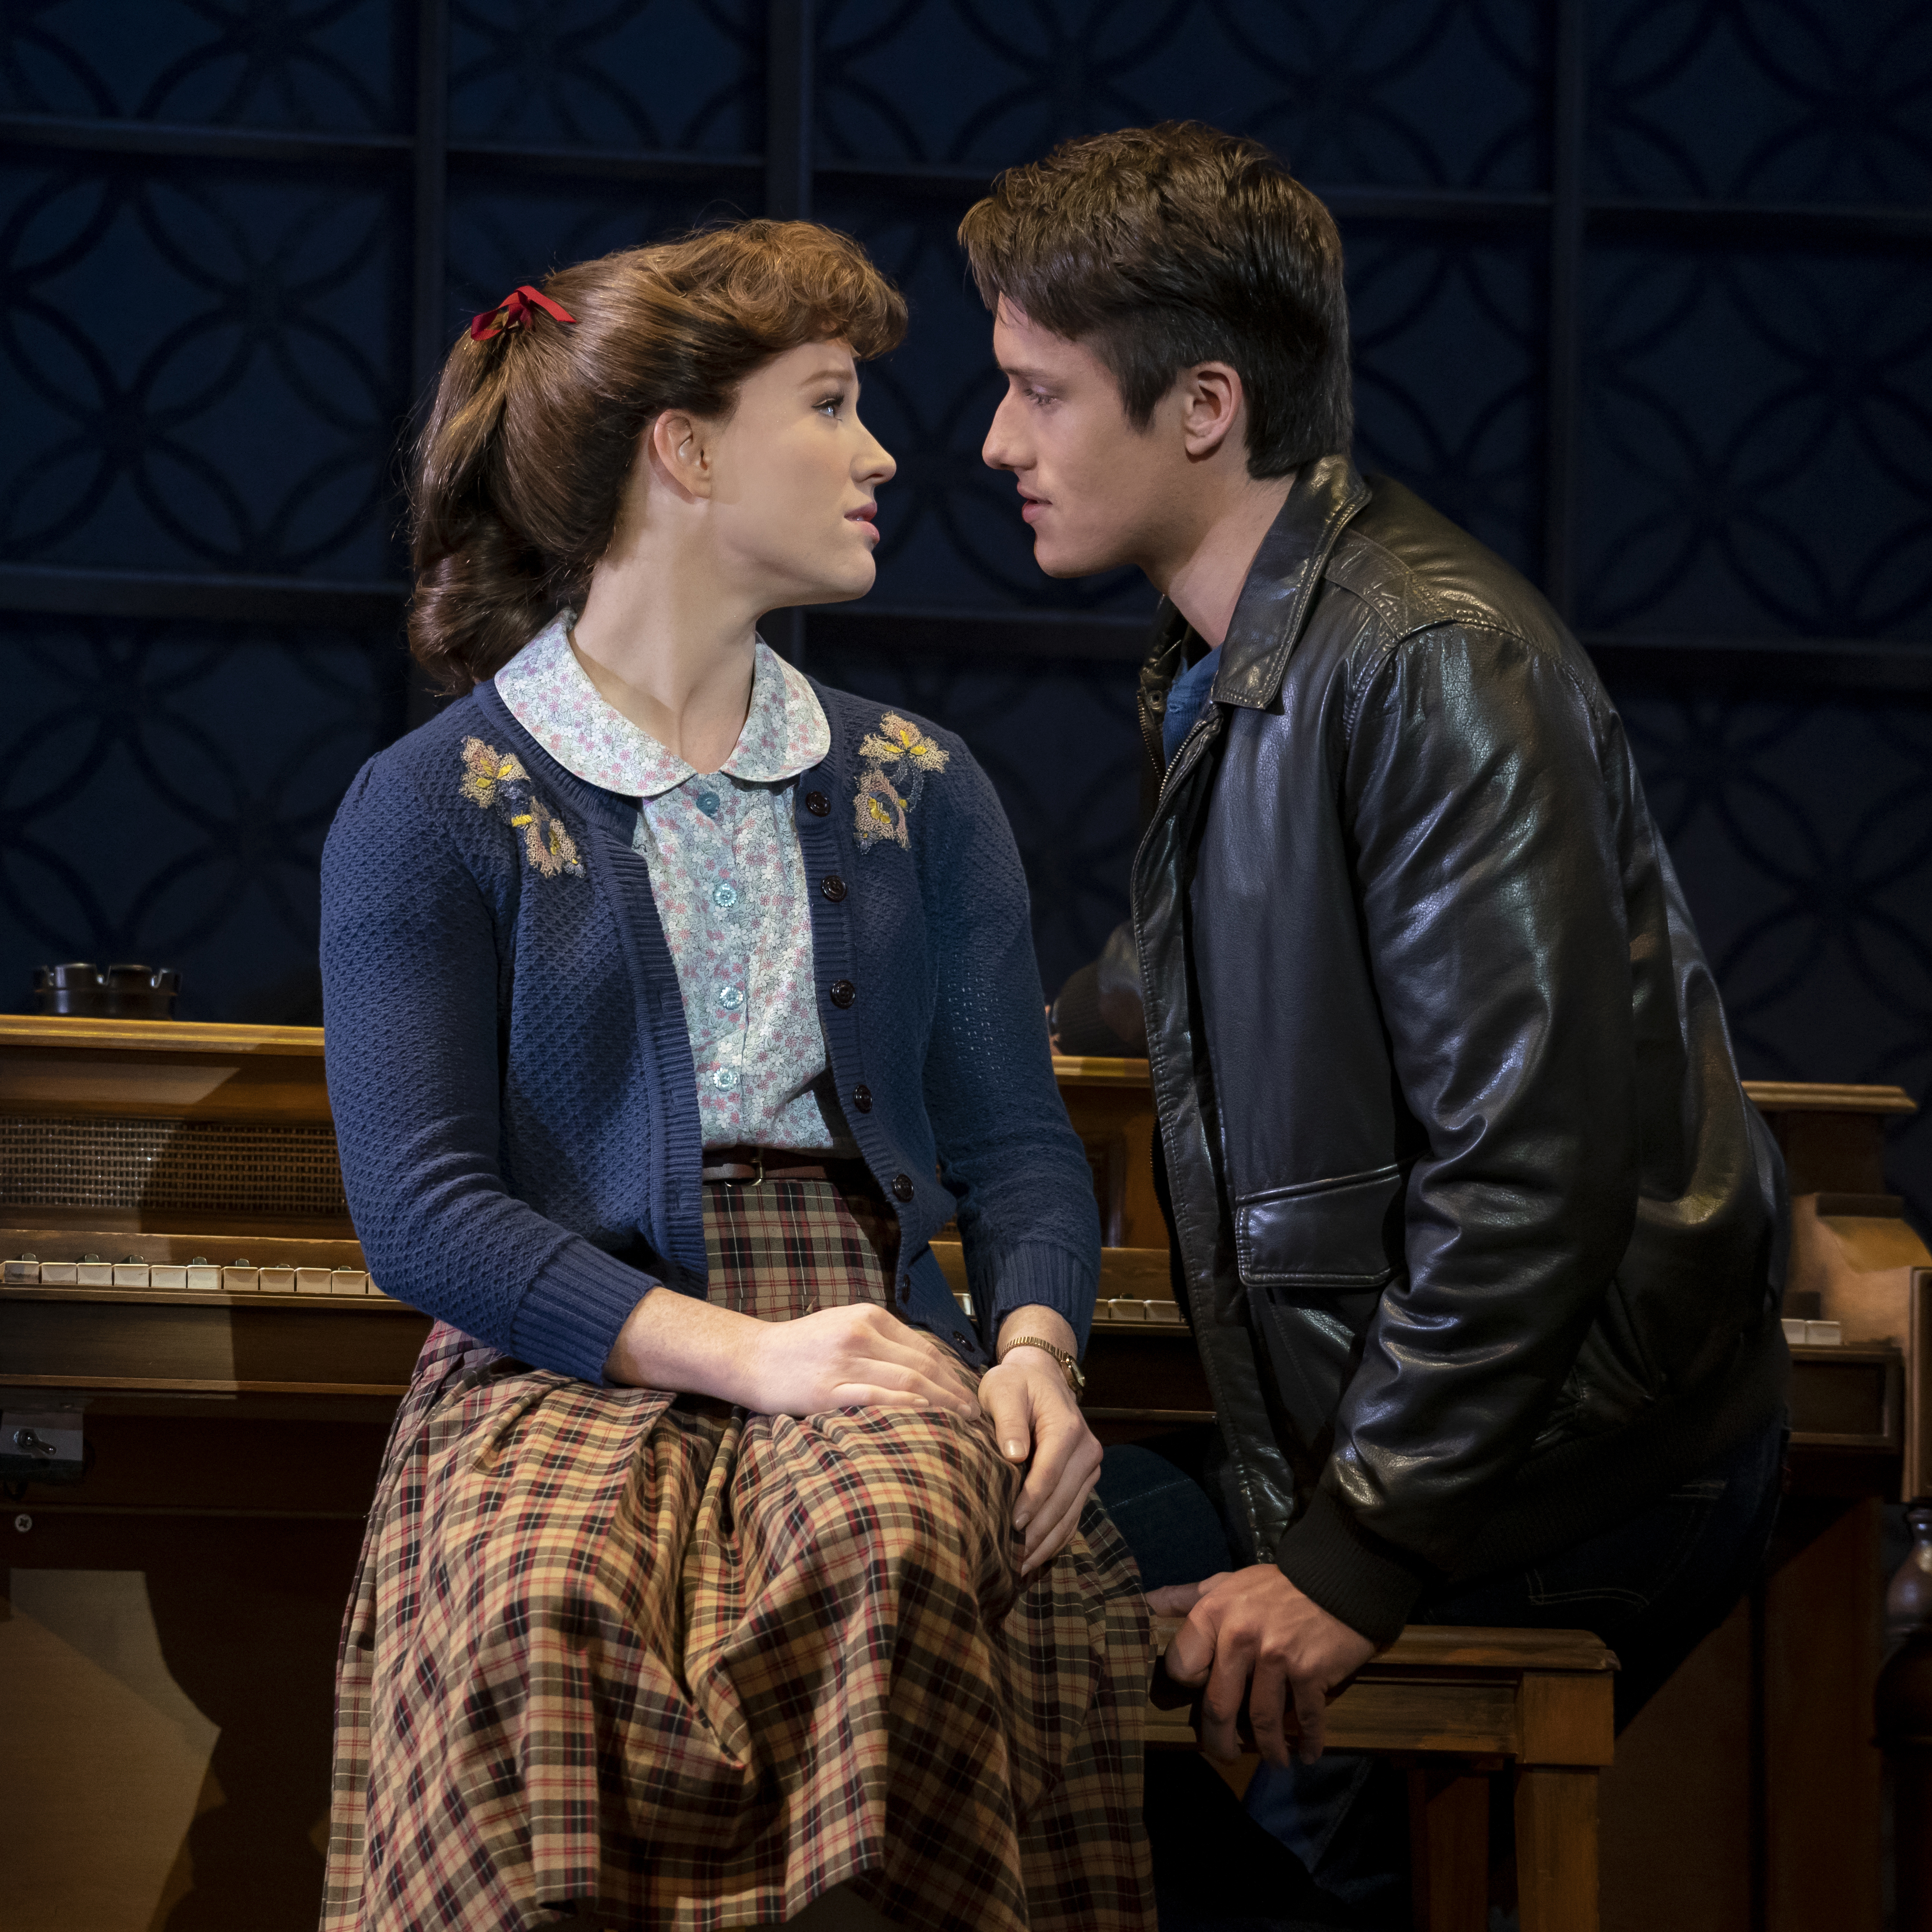 Photos by Joan Marcus.Queens College. Kennedy Caughell (“Carole King”) and James D. Gish (“Gerry Goffin”)